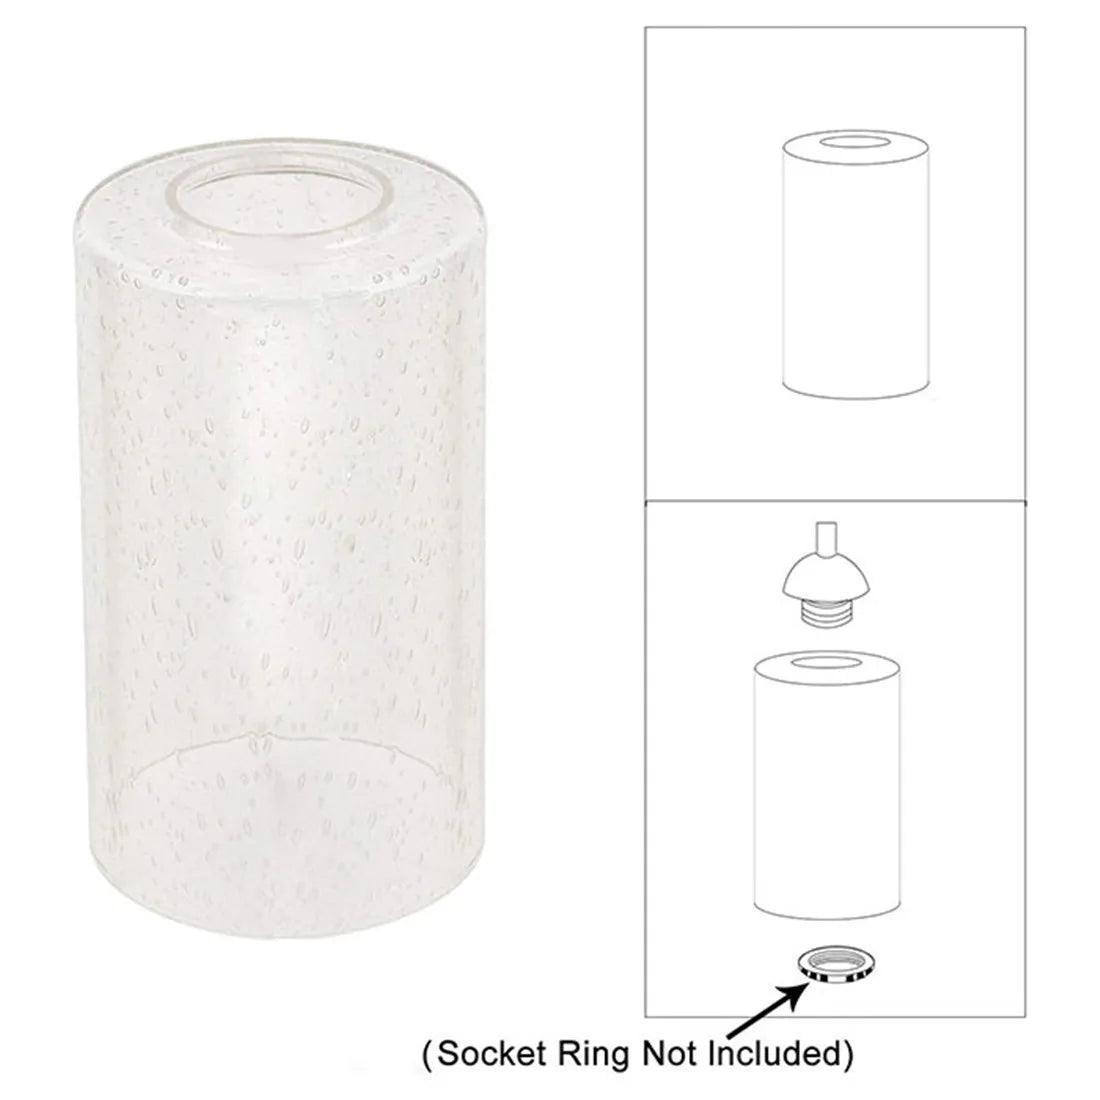 Clear Seeded Glass Shade Cylinder Bubble Glass Lampshade - Specialty Shades